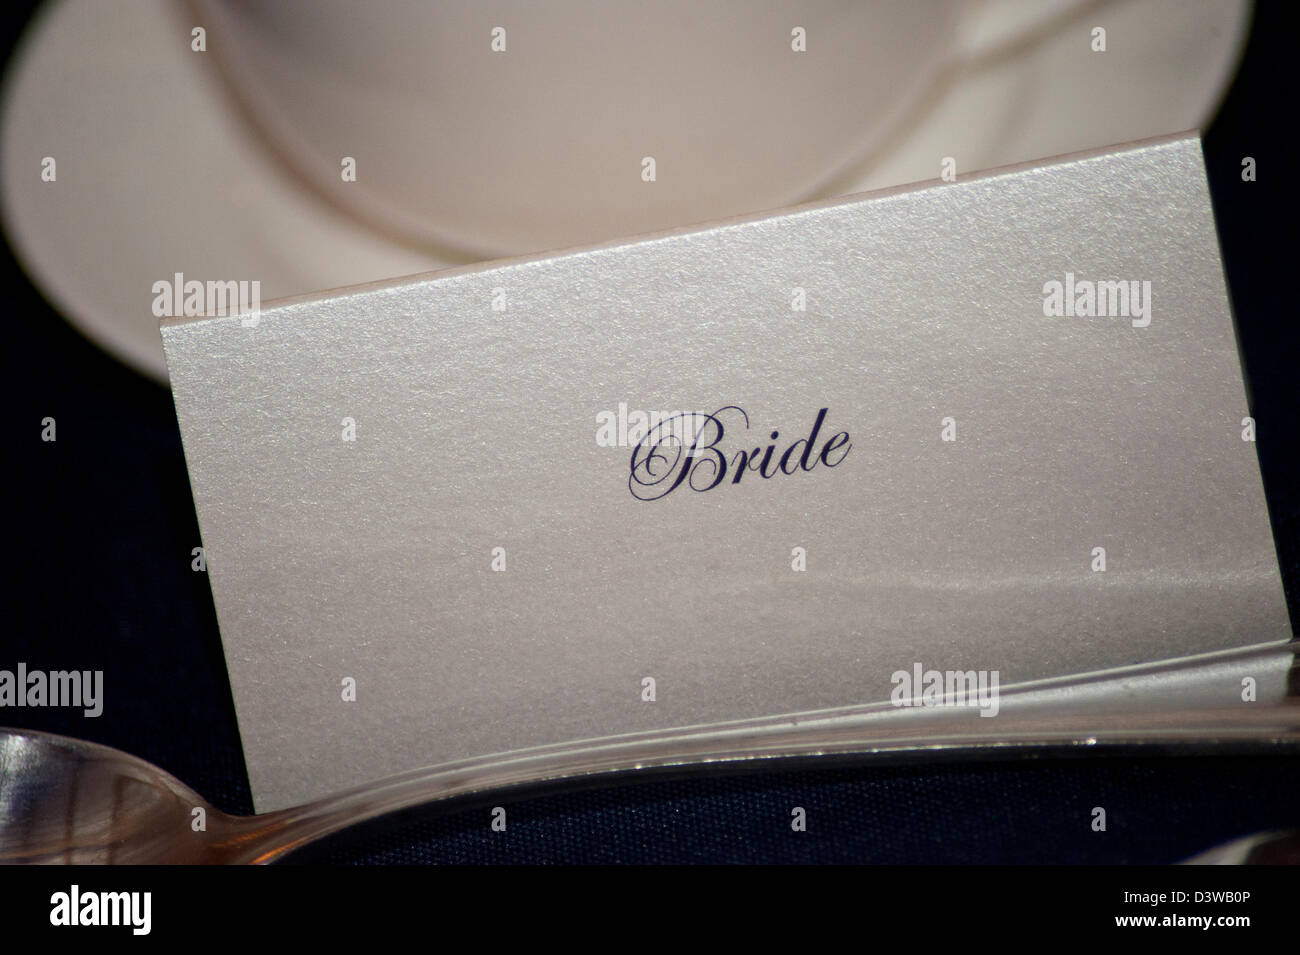 A card on the head table at a wedding displaying the name 'bride' Stock Photo